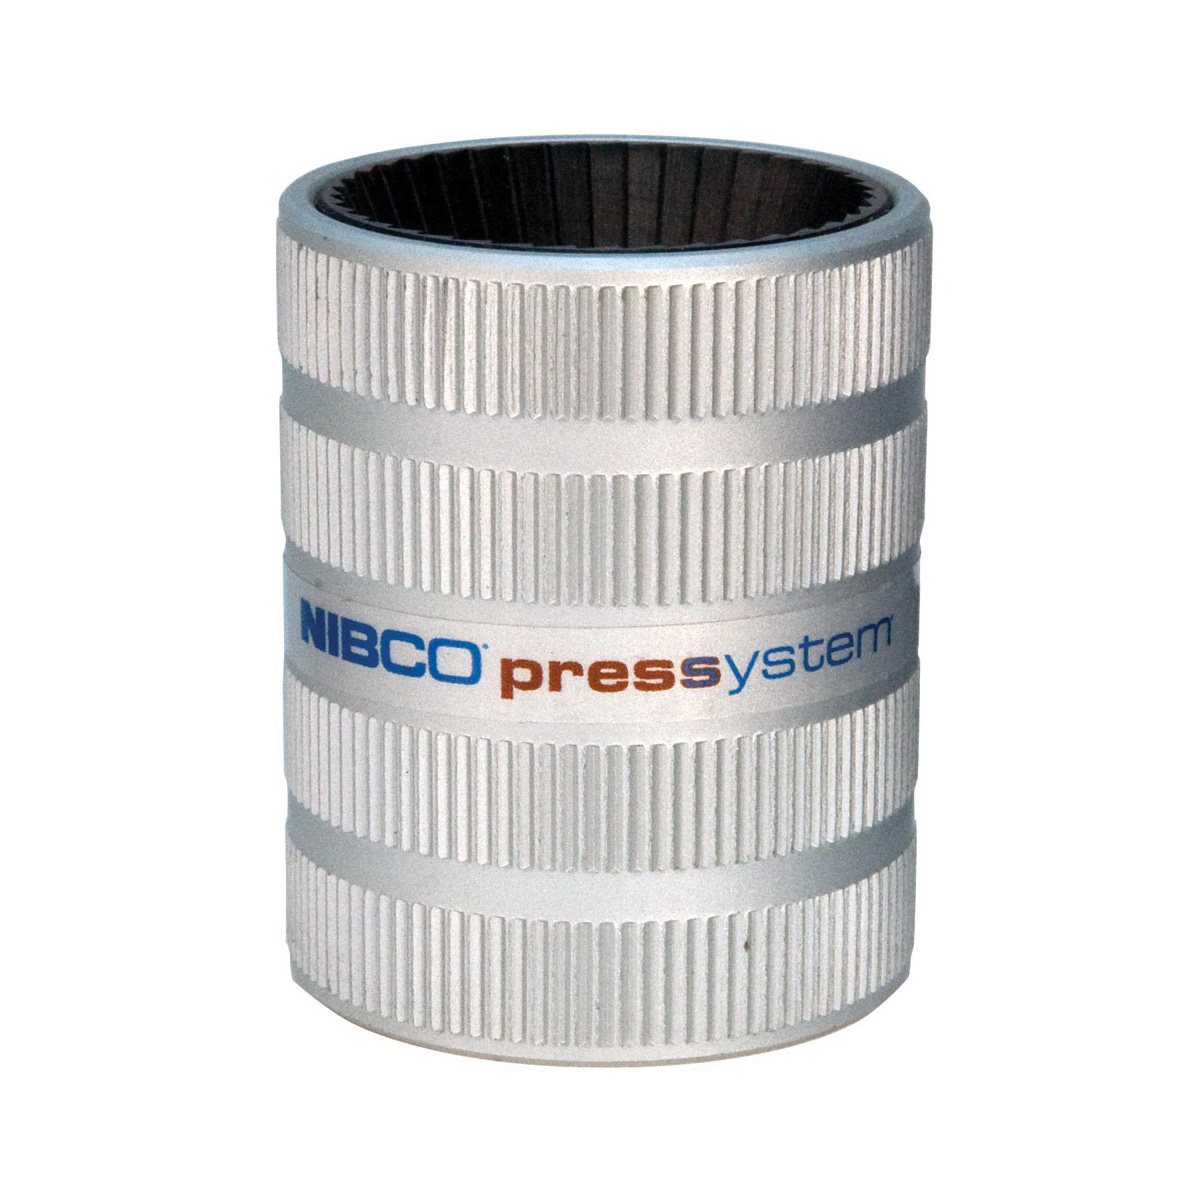 NIBCO® R00400PC PC-50 Deburring Tool, For Use With 1/2 to 1 in Tubing Press System® Tools